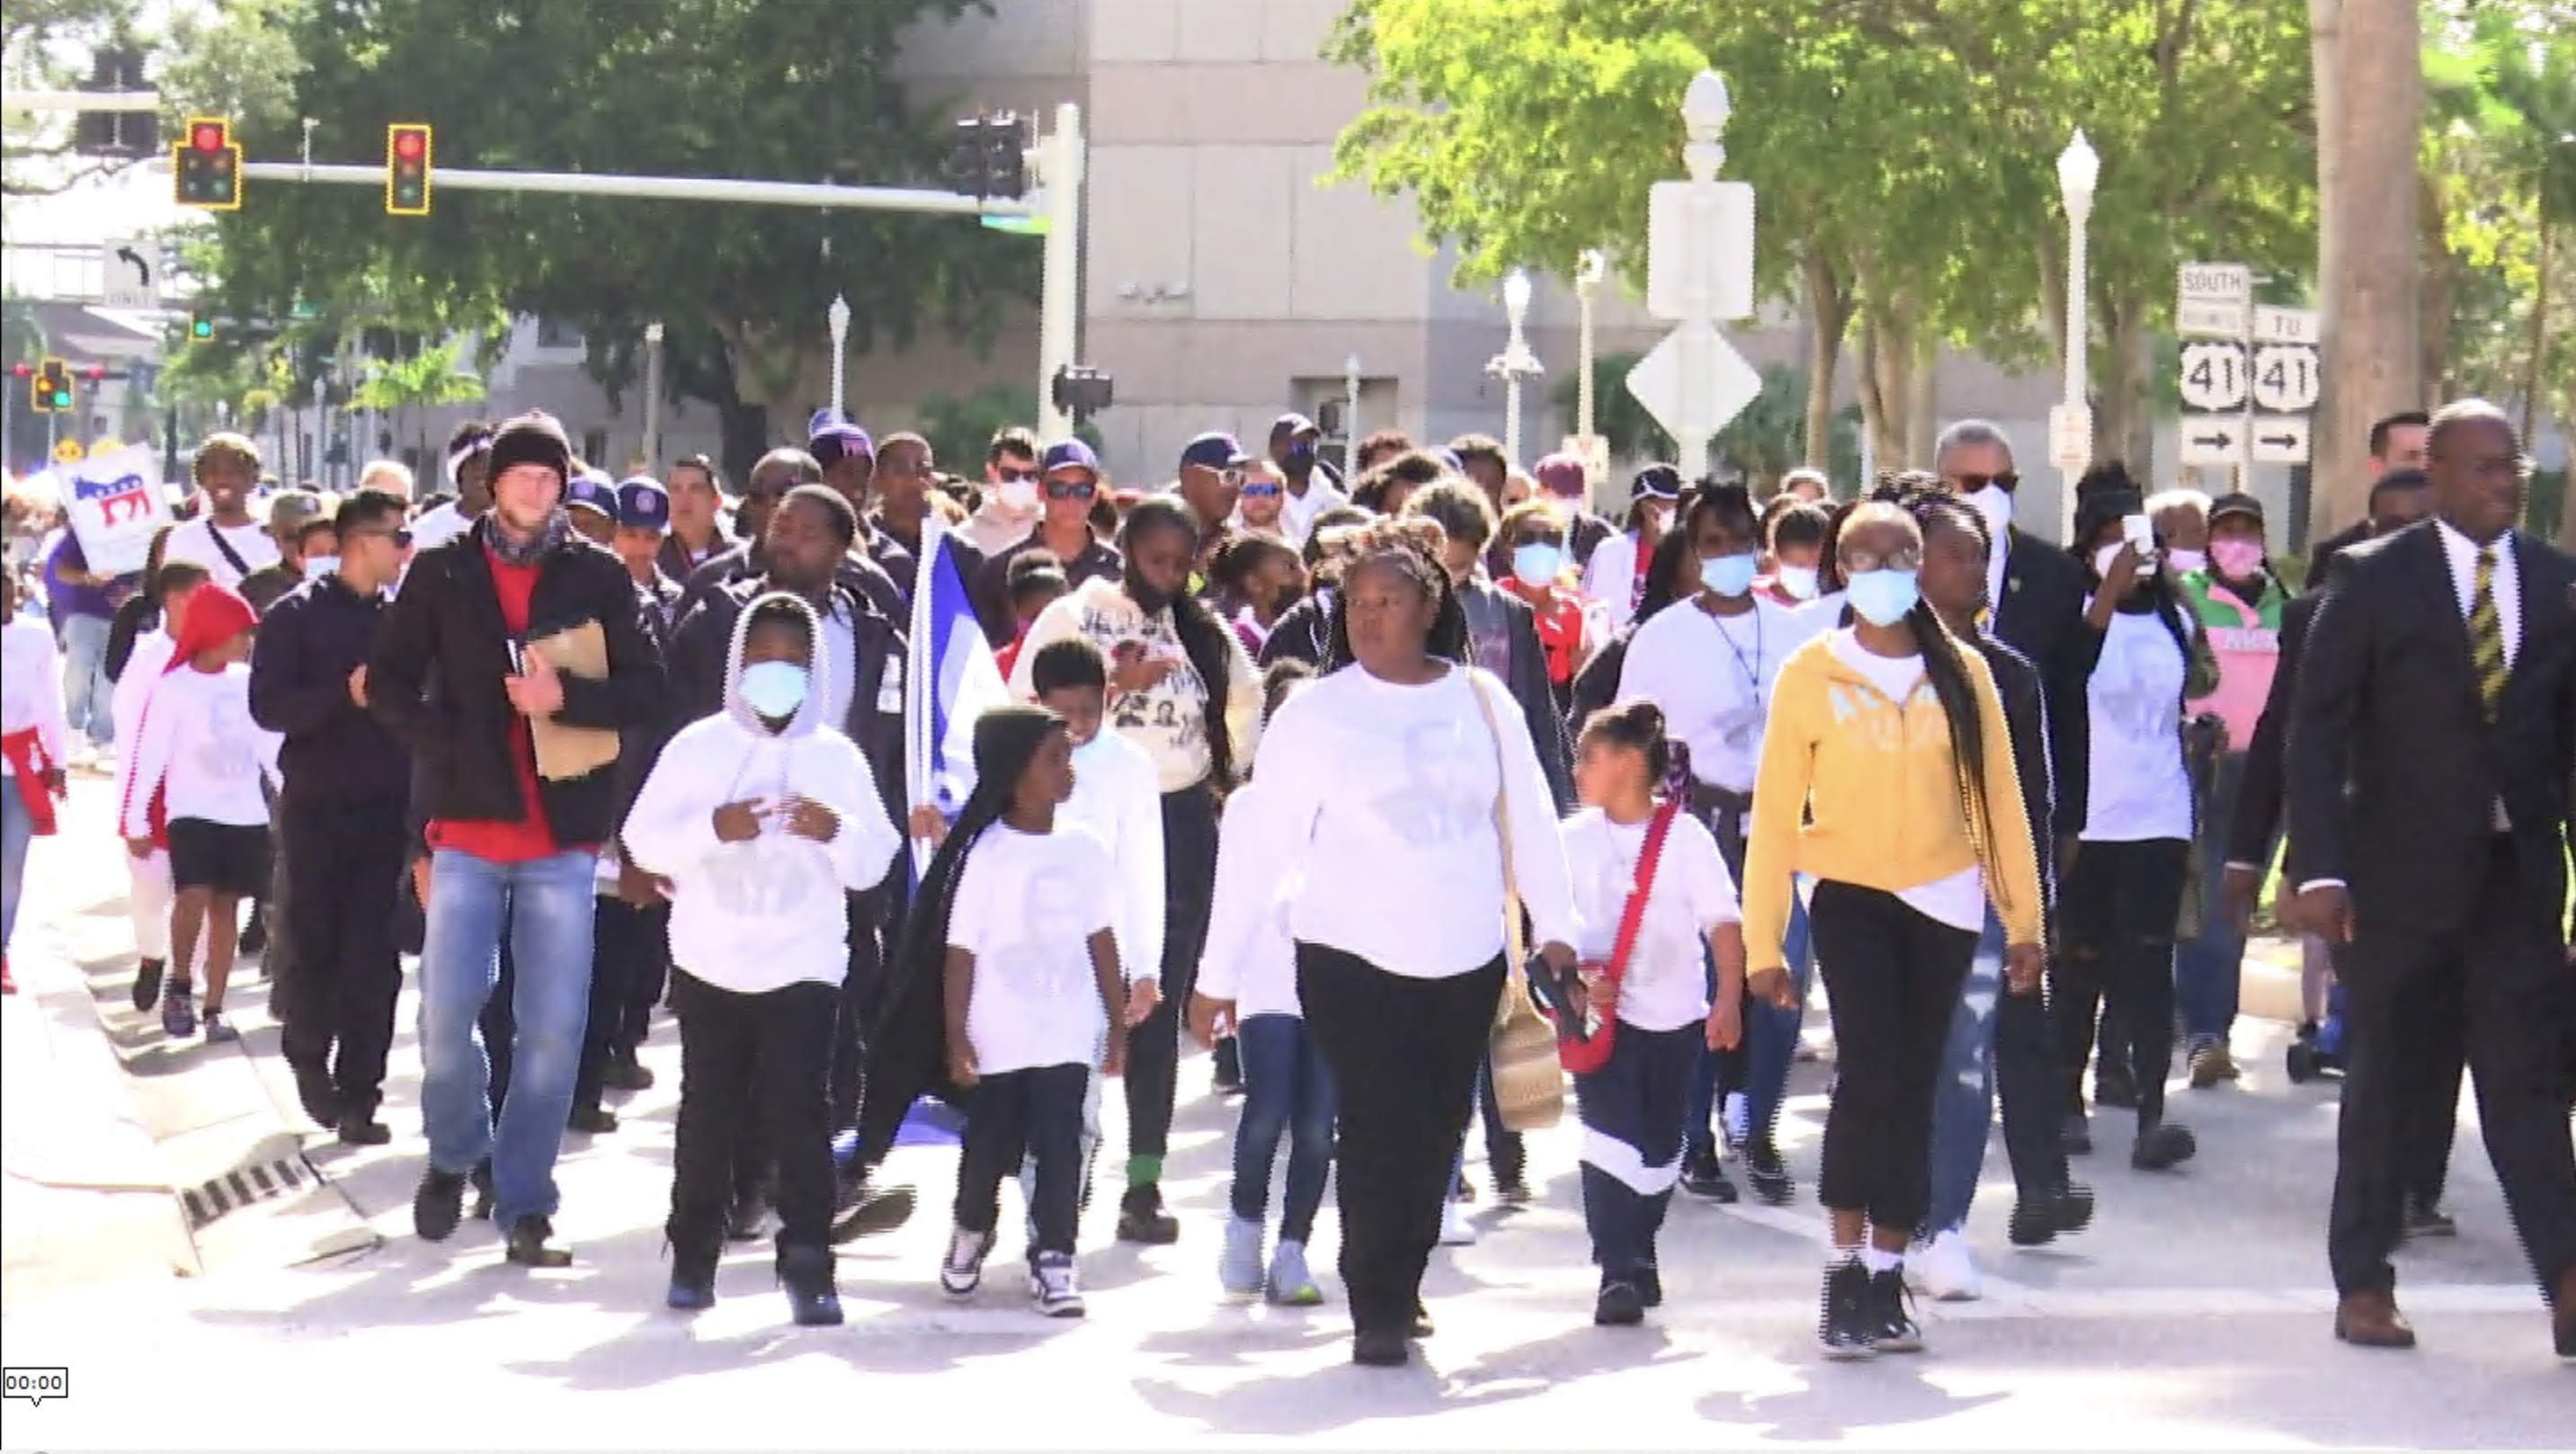 FORT MYERS MLK MARCH 2022